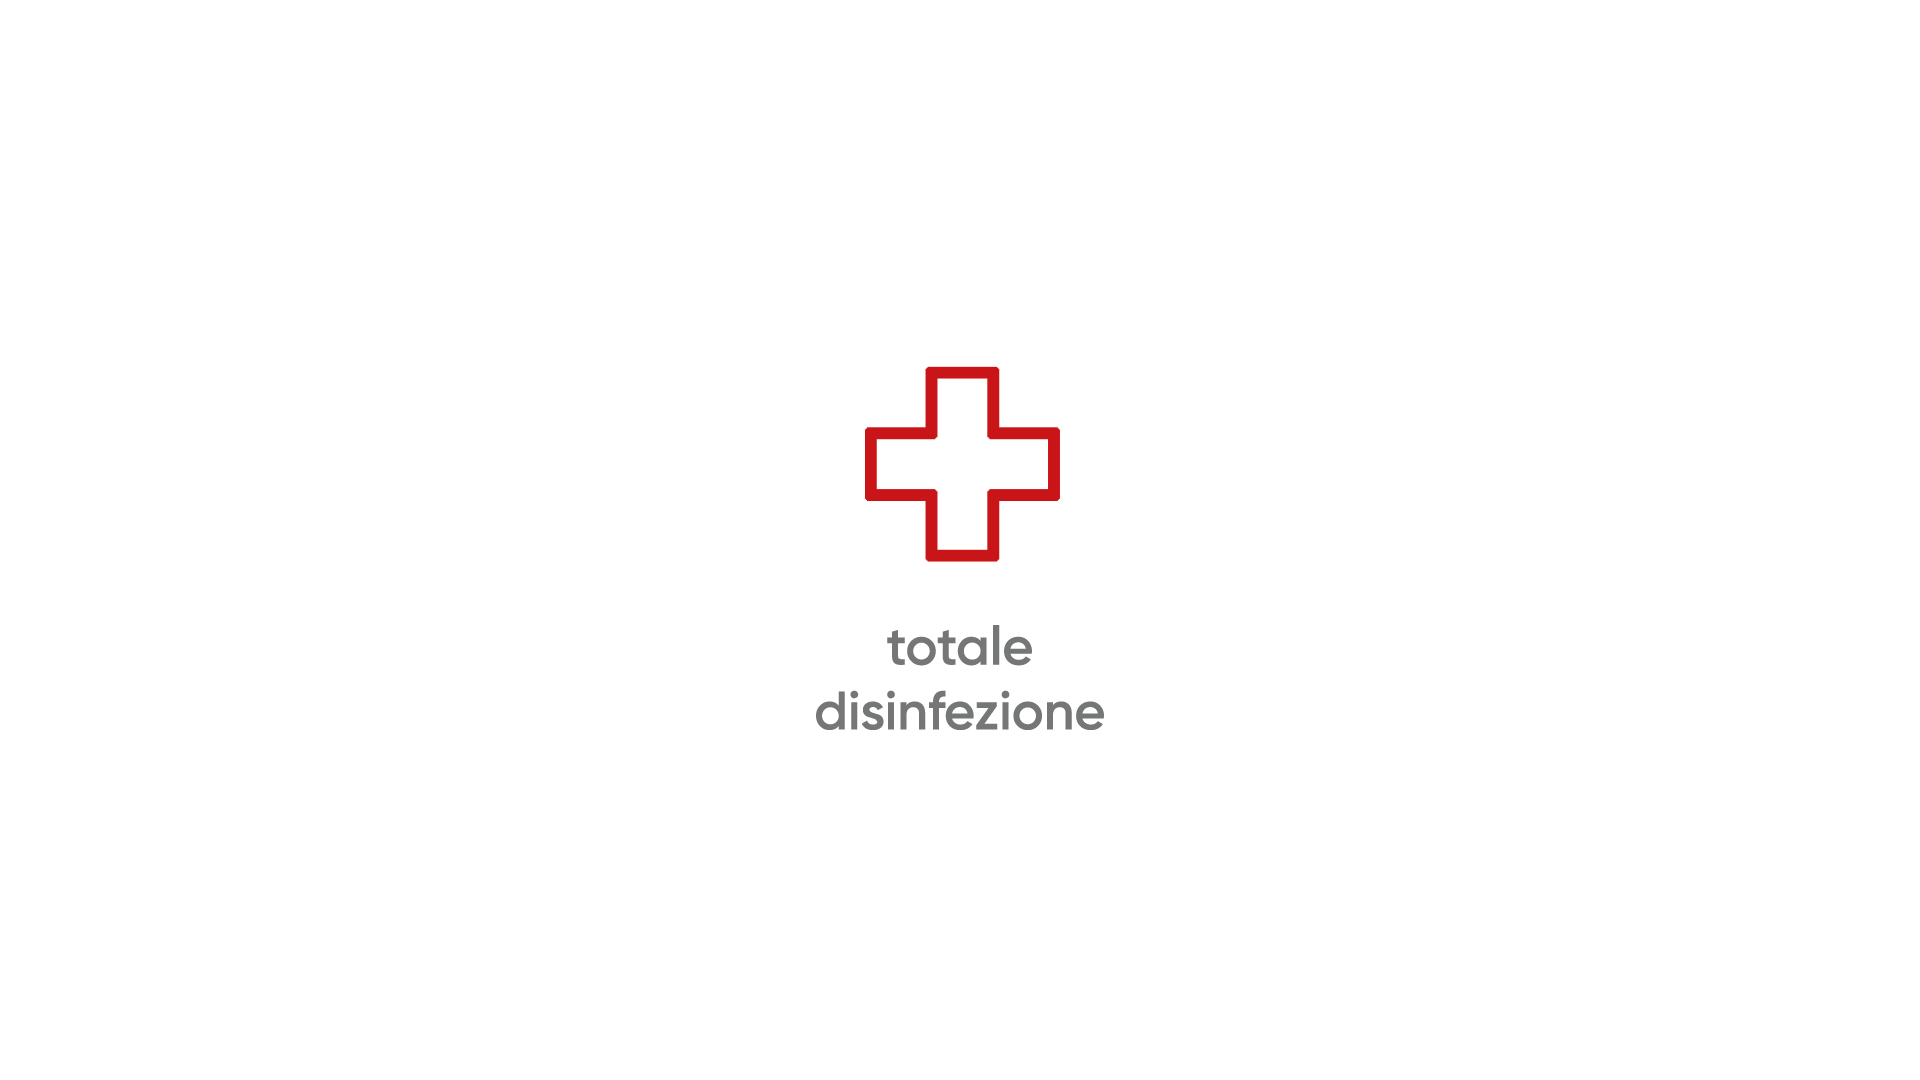 rm_air_totale_disinfezione